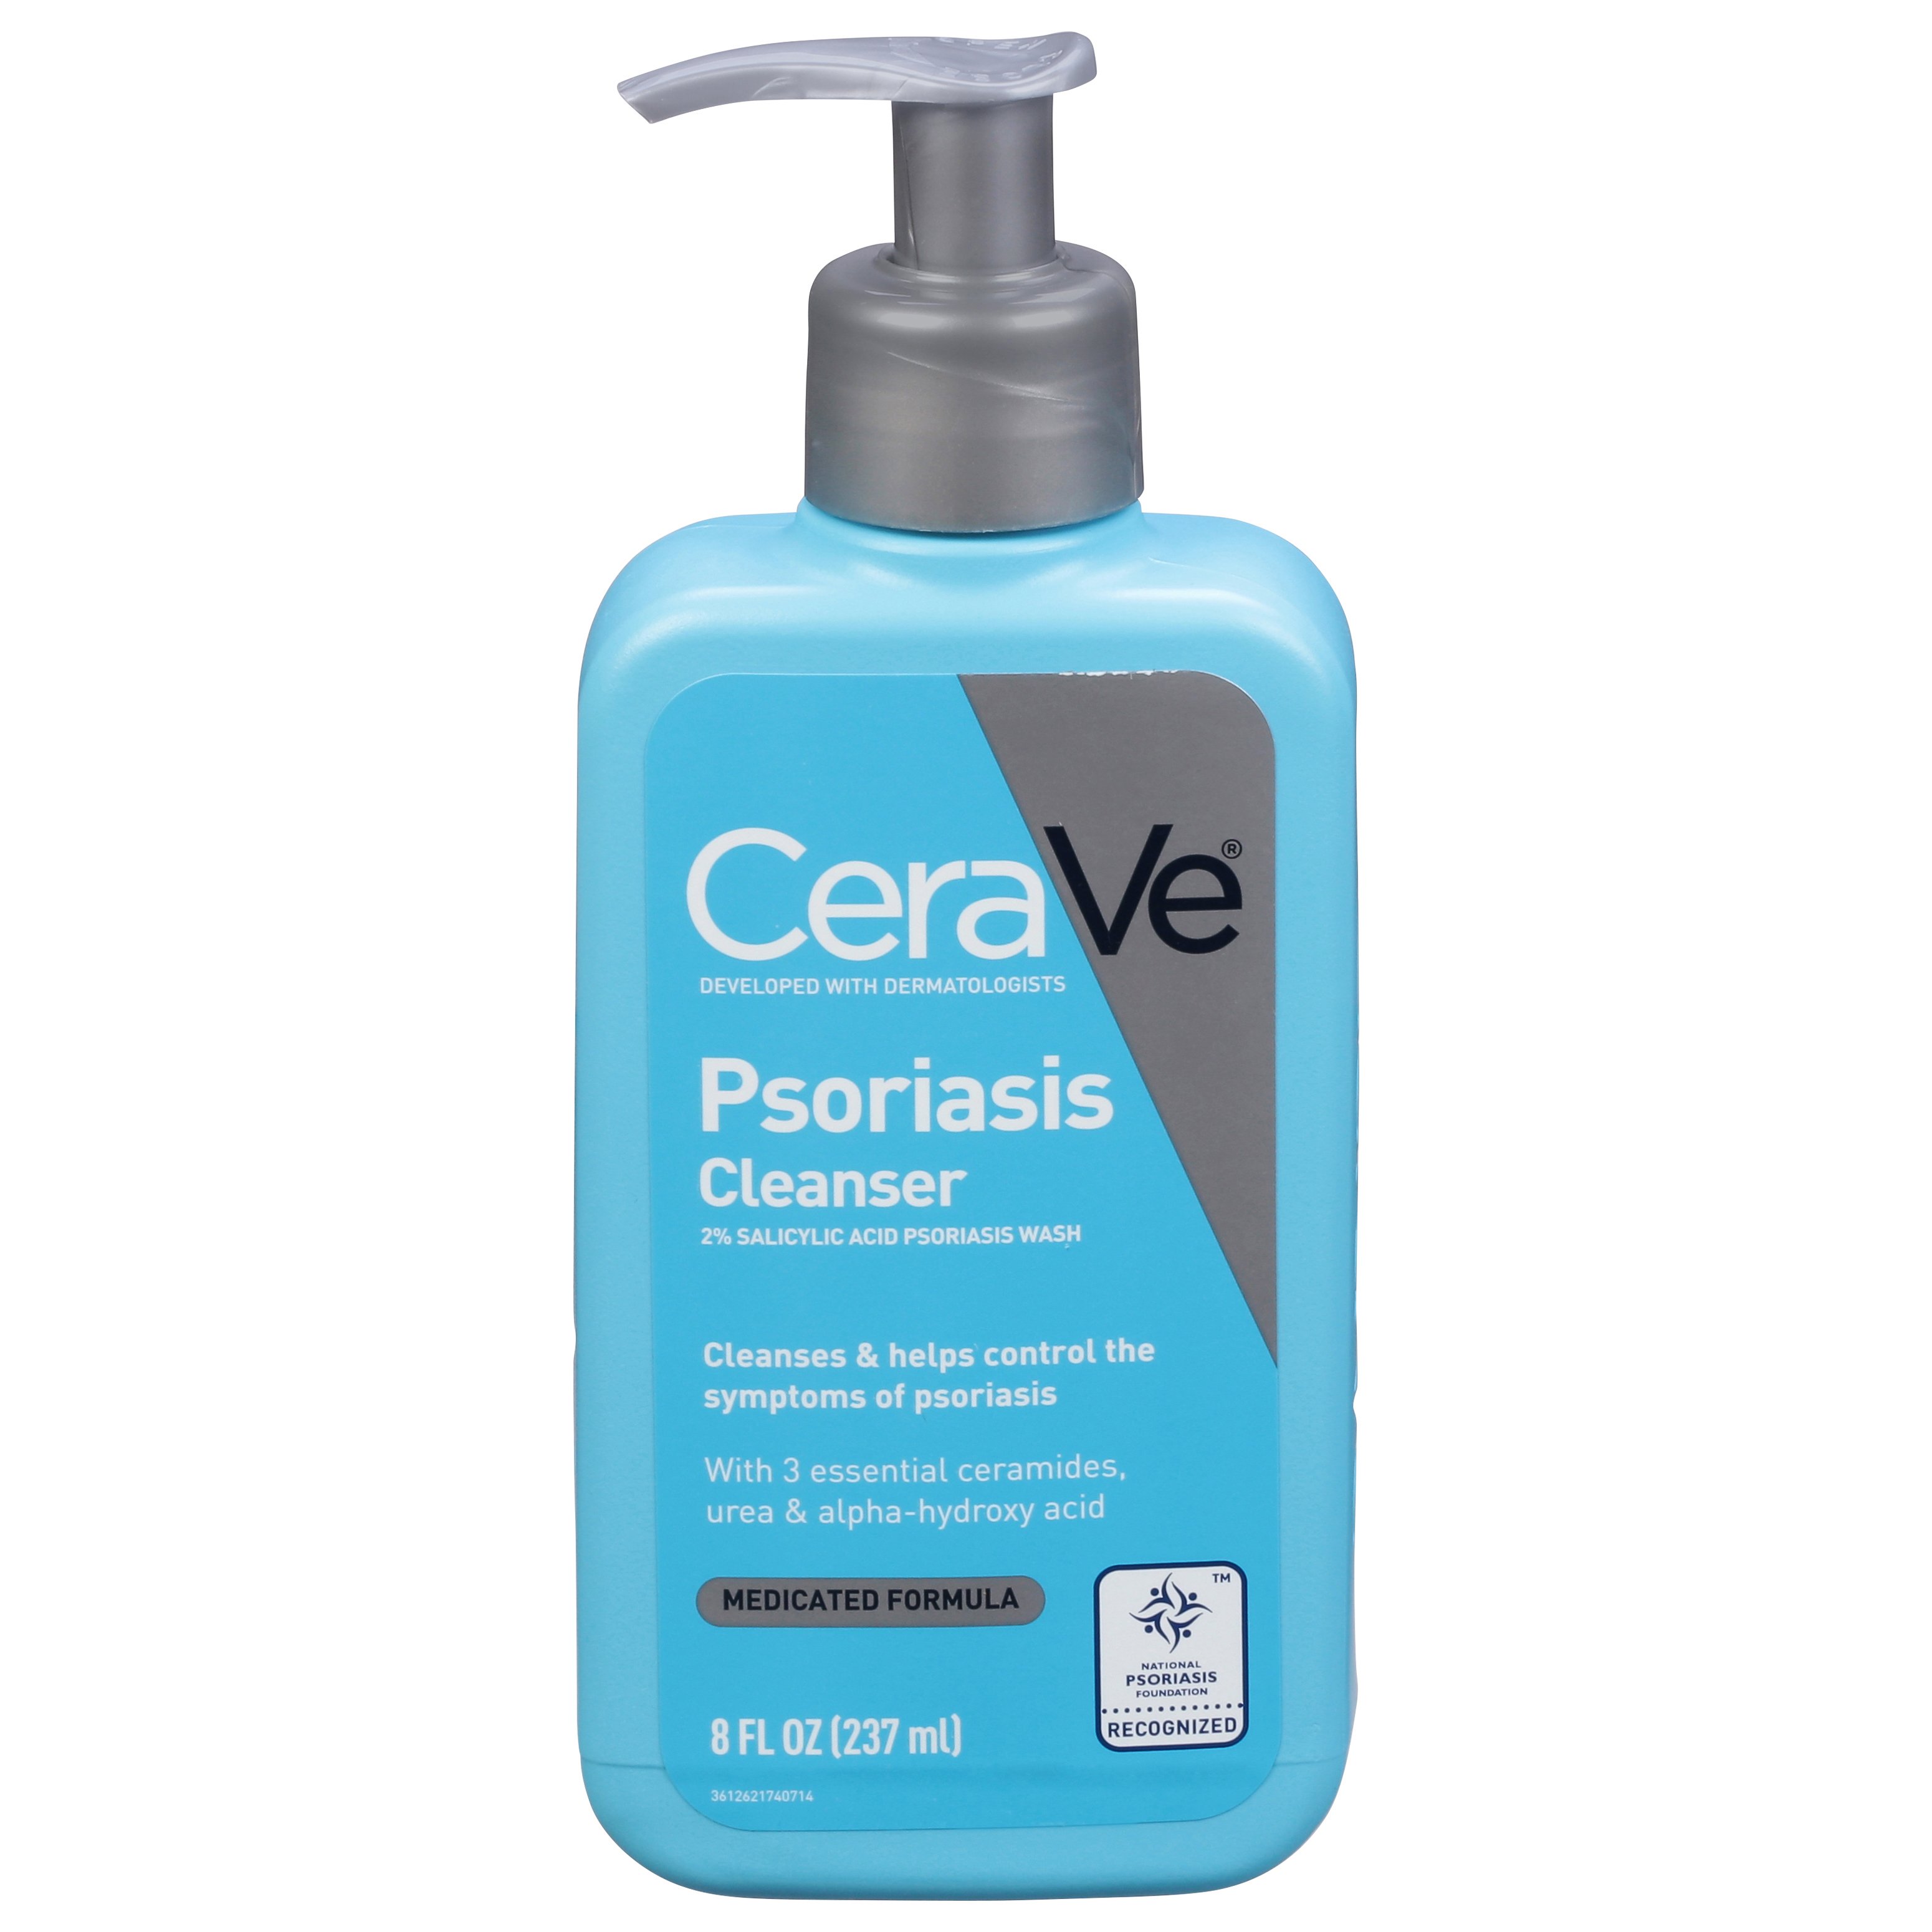 cerave psoriasis cleanser near me